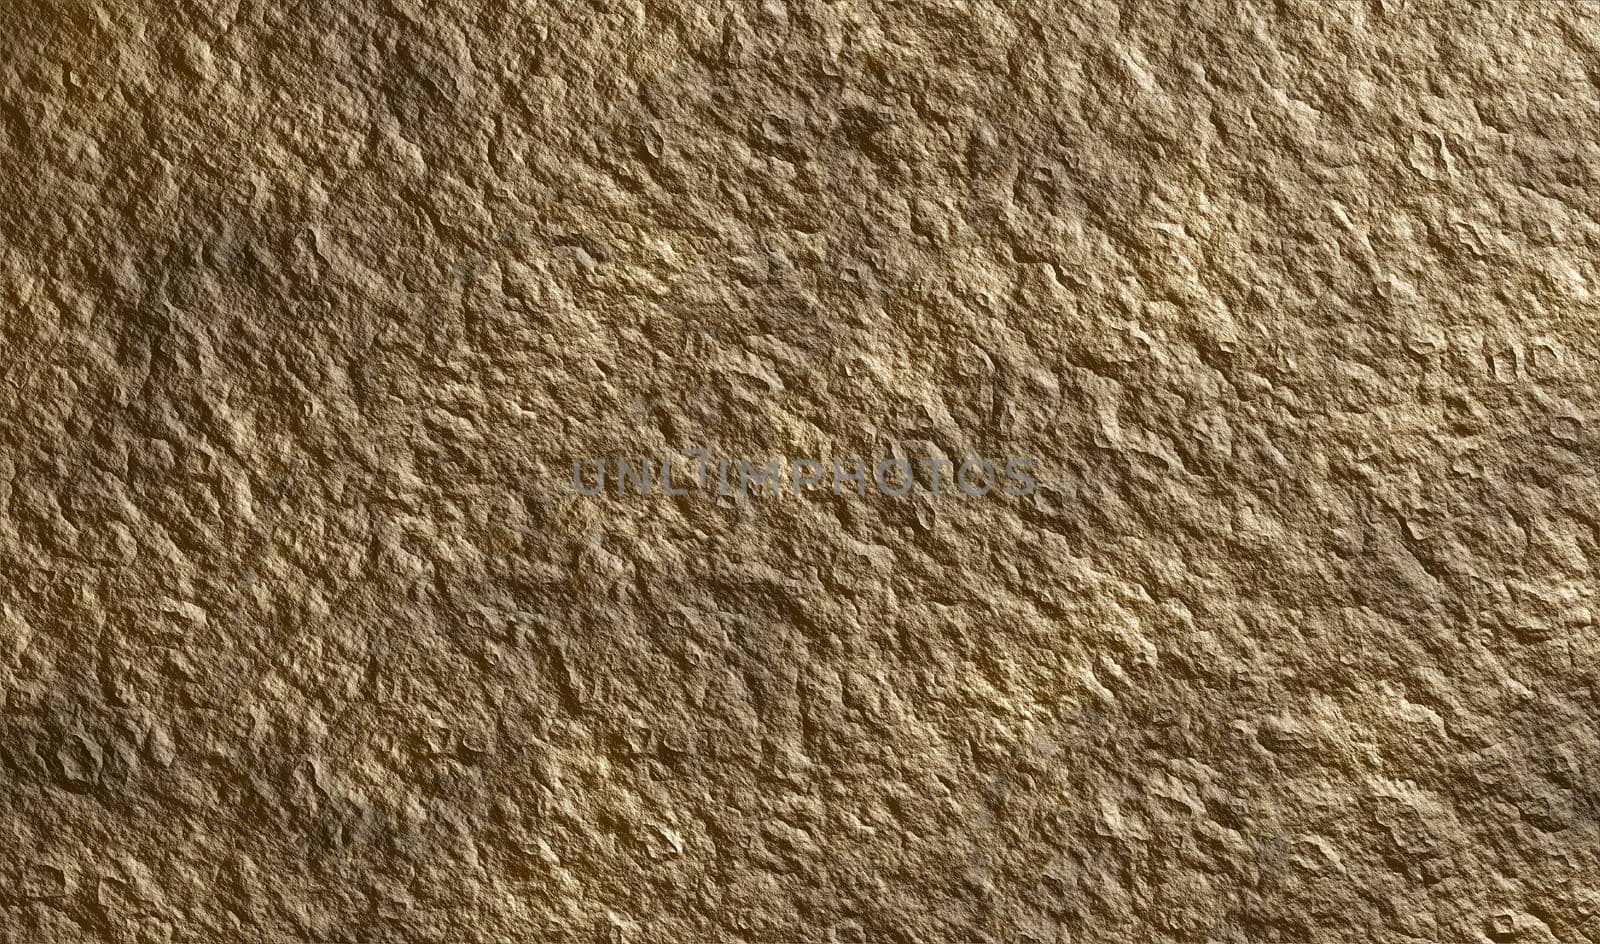 Wall stone rock abstract background texture closeup  by bormash